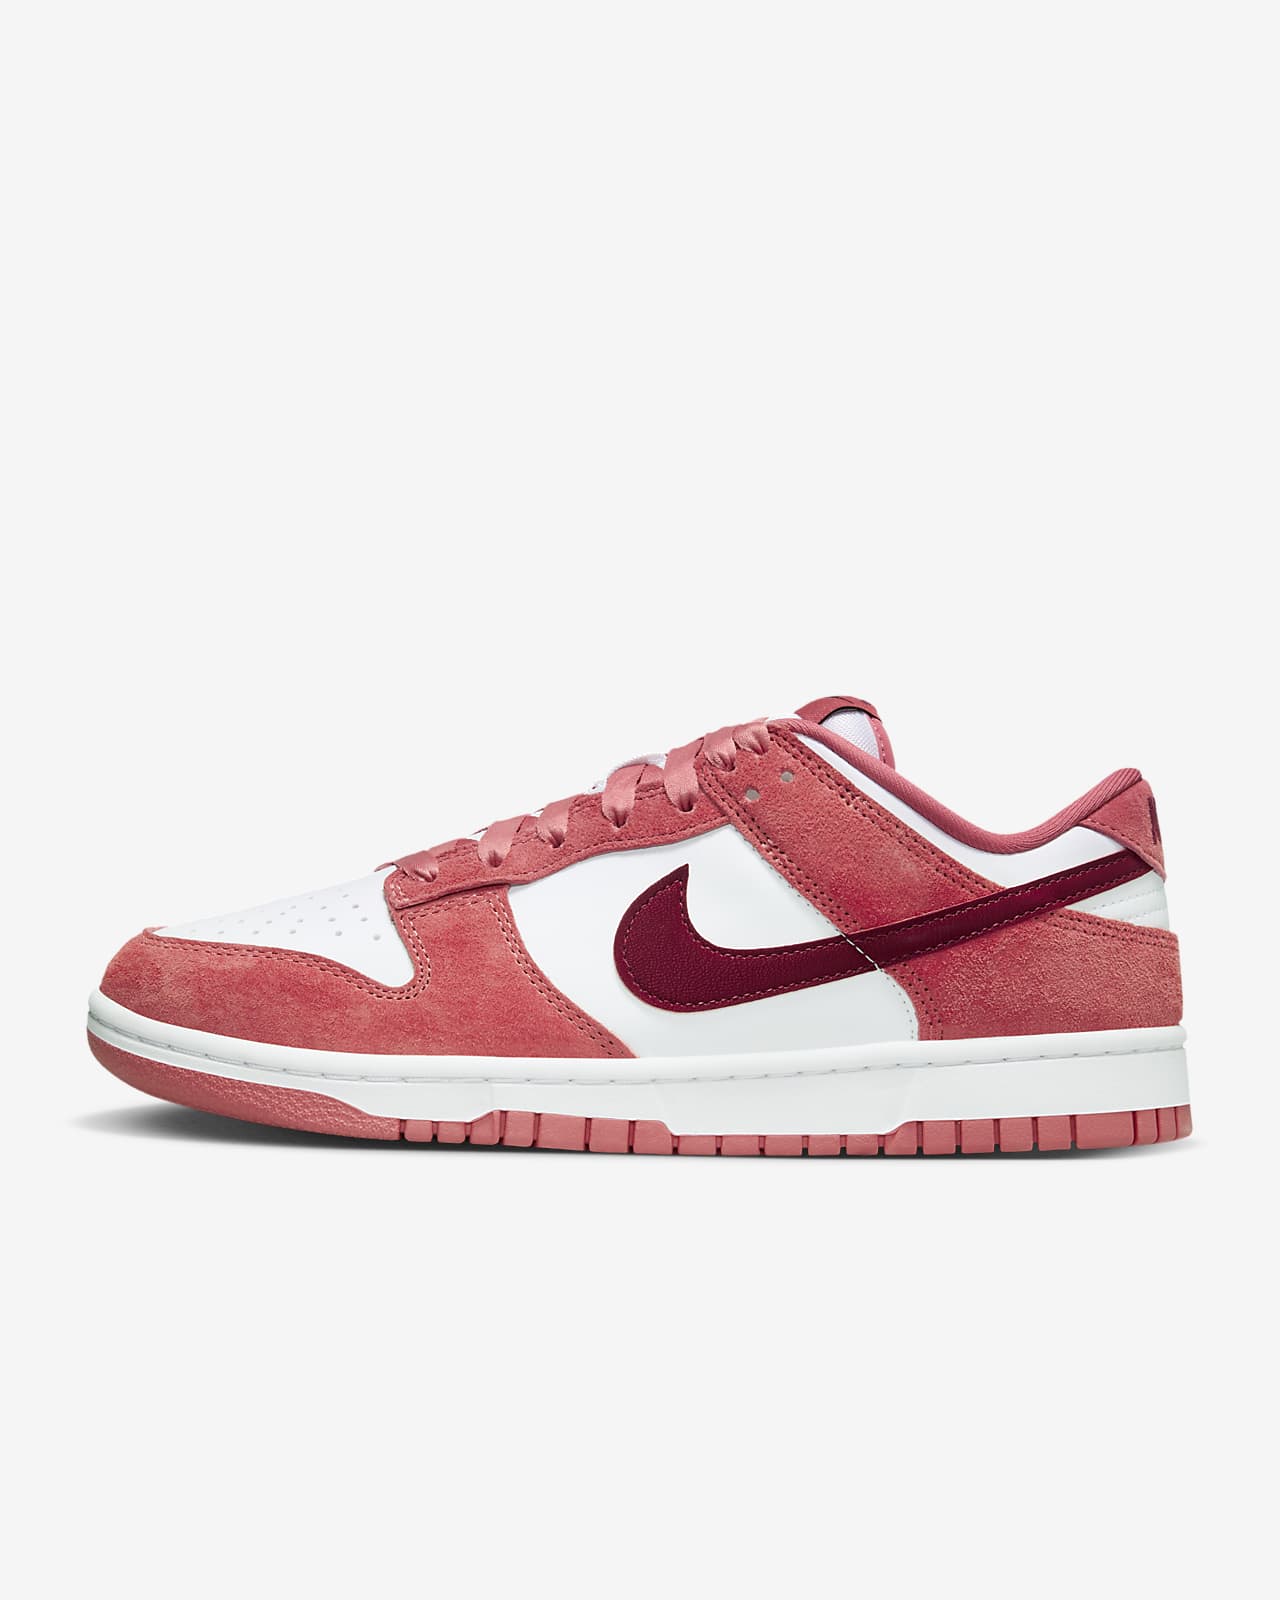 NIKE WMNS DUNK LOW "MADE YOU LOOK" 23.5